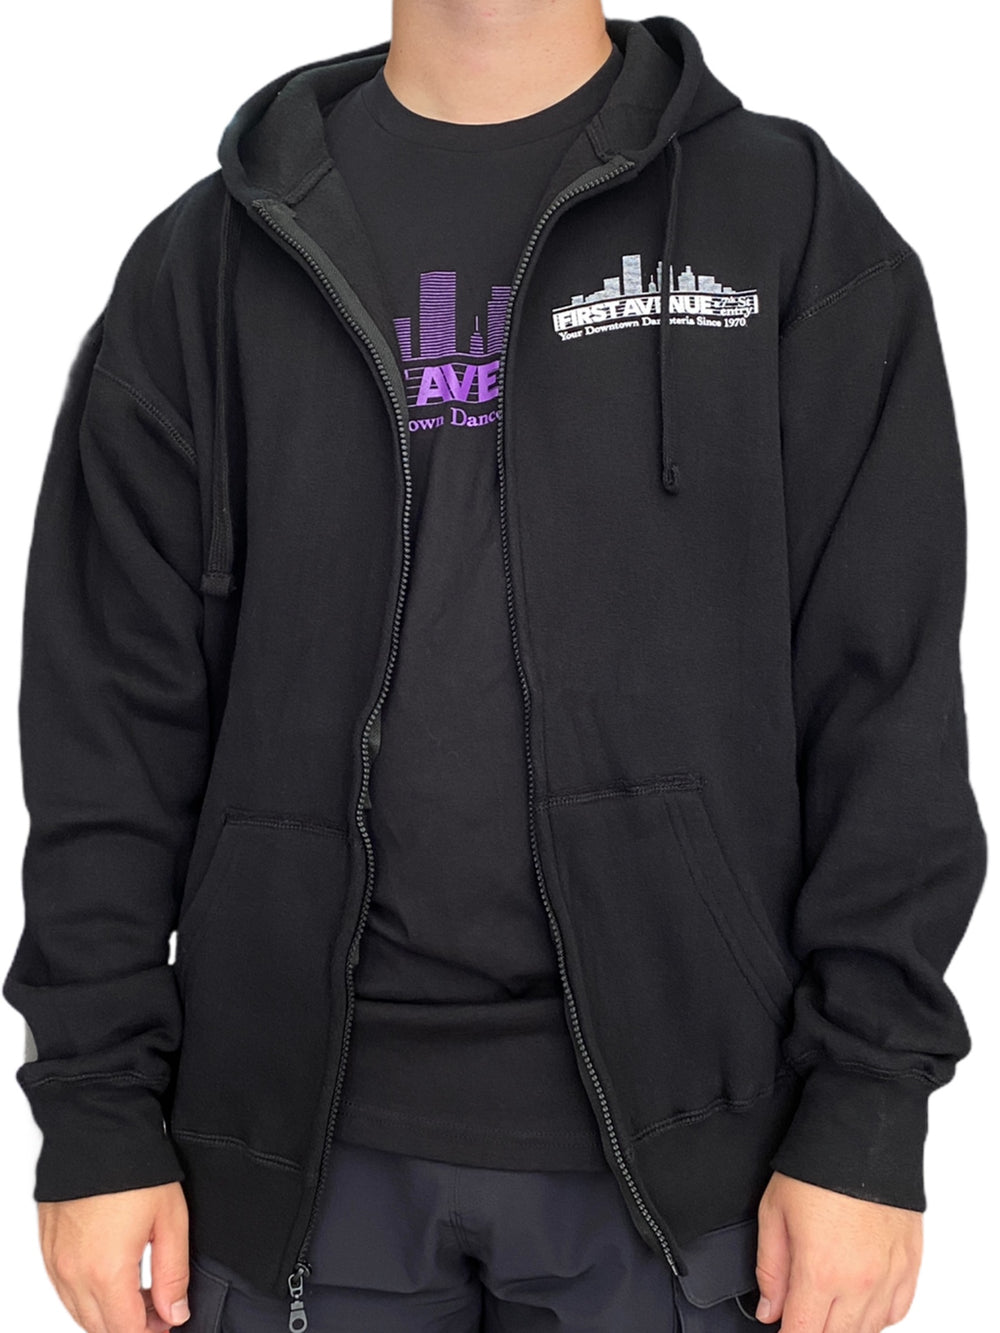 Prince –  First Avenue Classic Zip Official Unisex Hoodie Various Sizes NEW